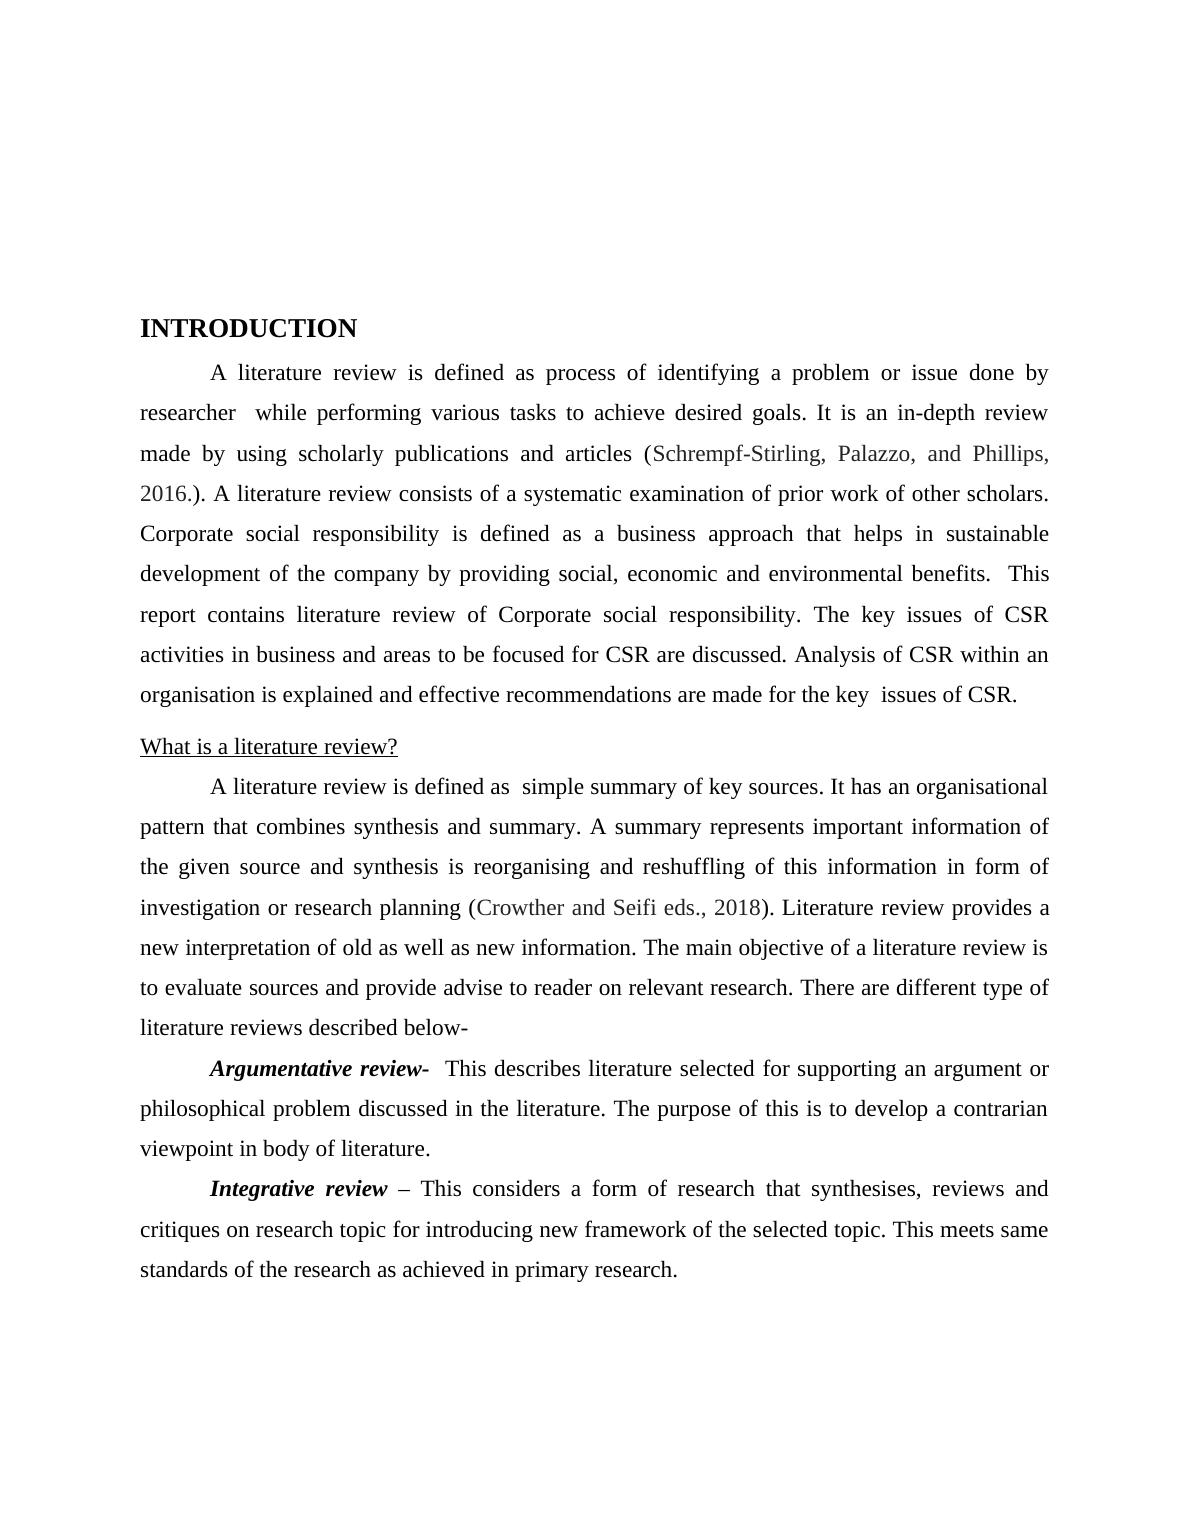 Literature Review on Corporate Social Responsibility (CSR)_3